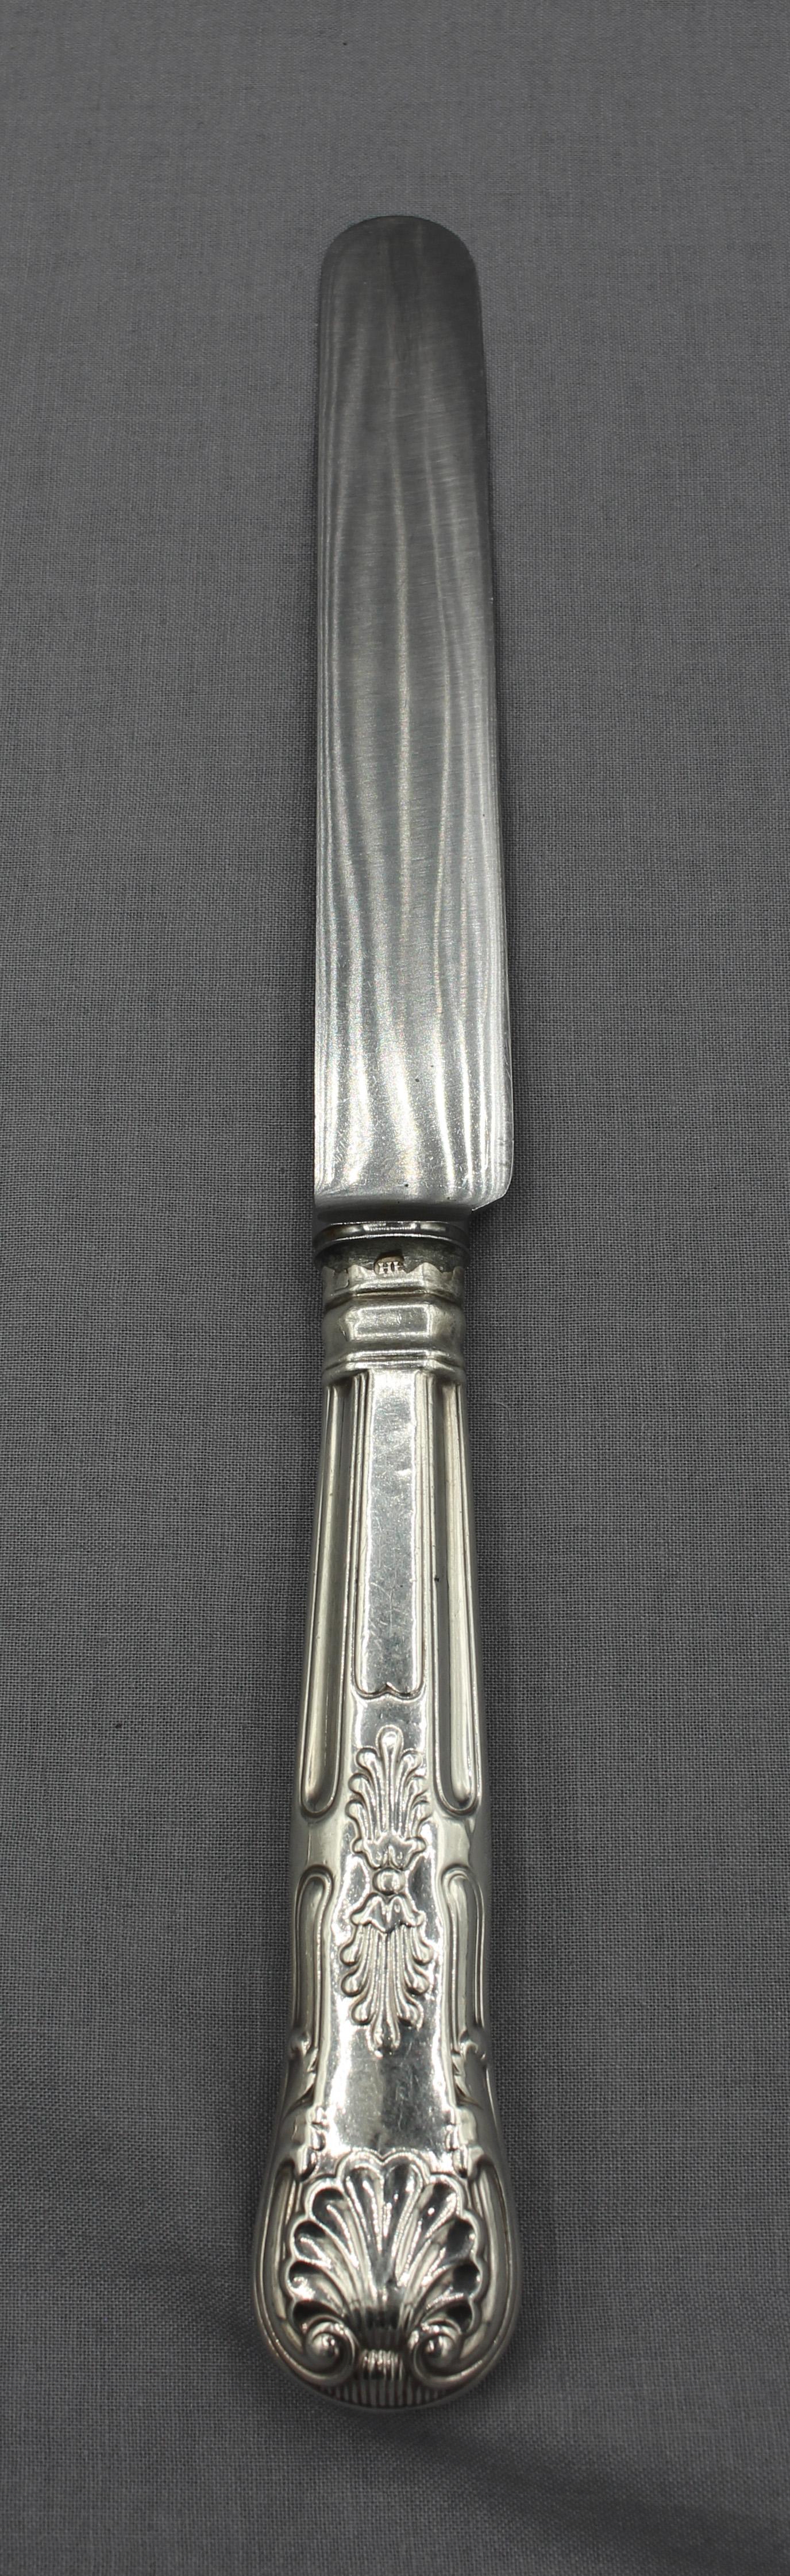 Set of 8 King's pattern dinner knives, London 1803. Hollow sterling silver handles with later Chrichton & Co Ltd. steel blades. Indistinct marks - London 1803 (H) and maker 